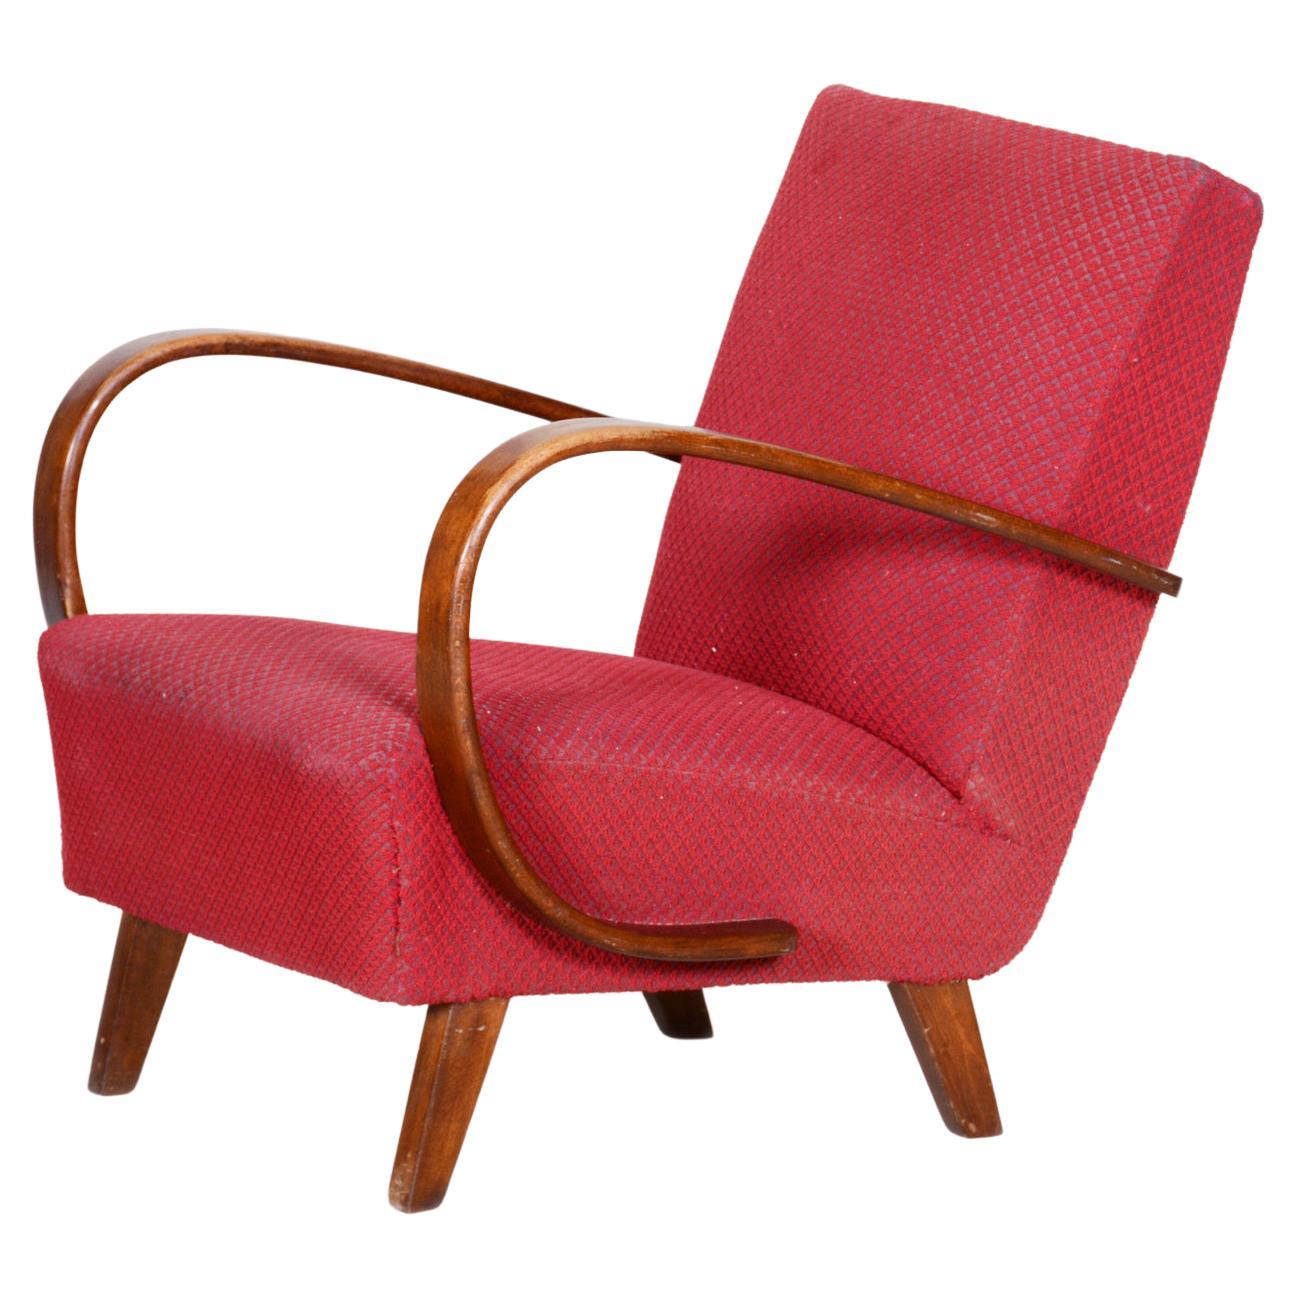 Red Armchair, Made in Czechia, 1930s, Original Condition, Art Deco Style For Sale